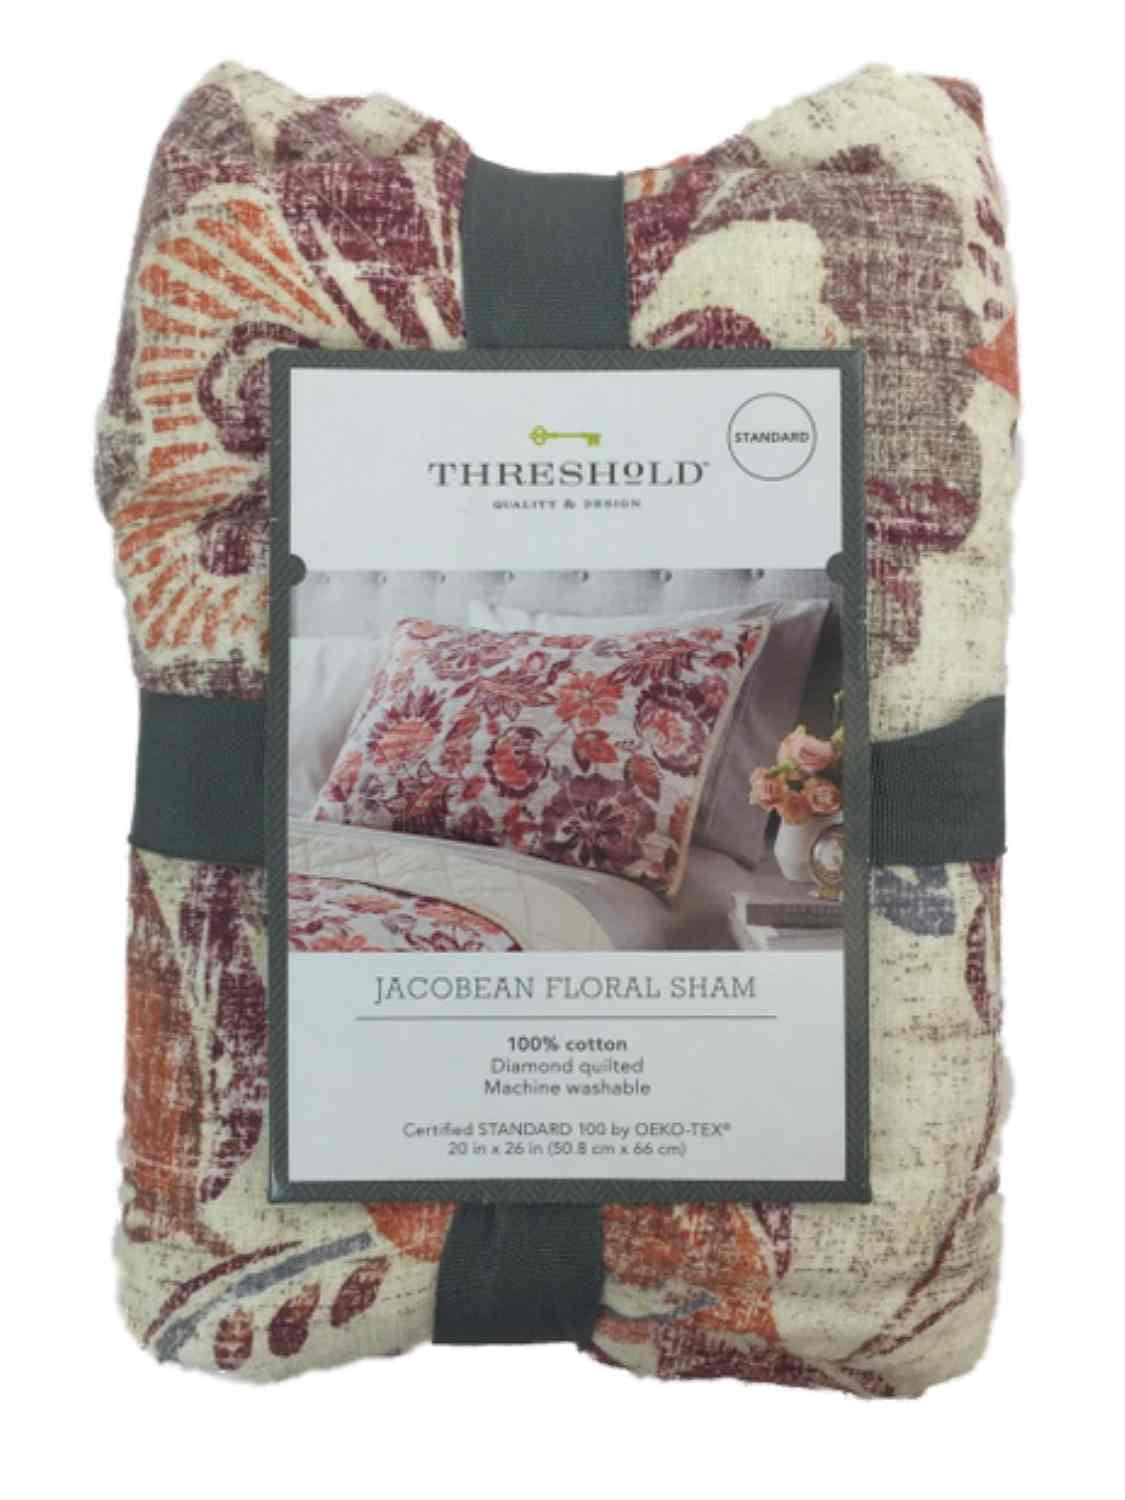 Threshold Pillowcase or Sham Standard Size Assorted Colors NEW 